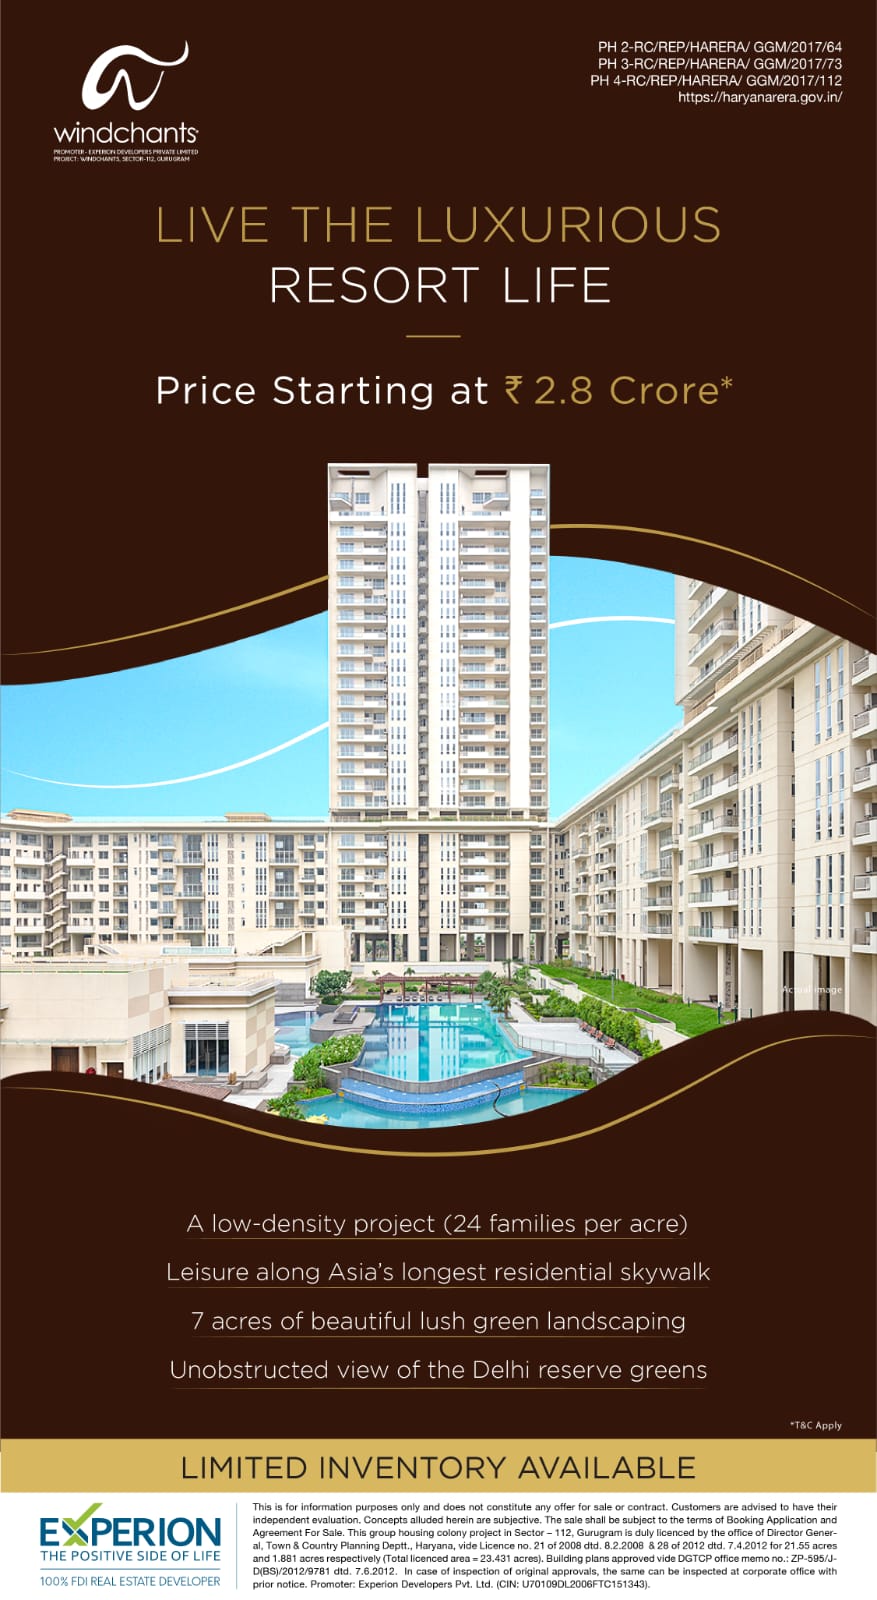 Limited inventory available at Experion Windchants, Gurgaon